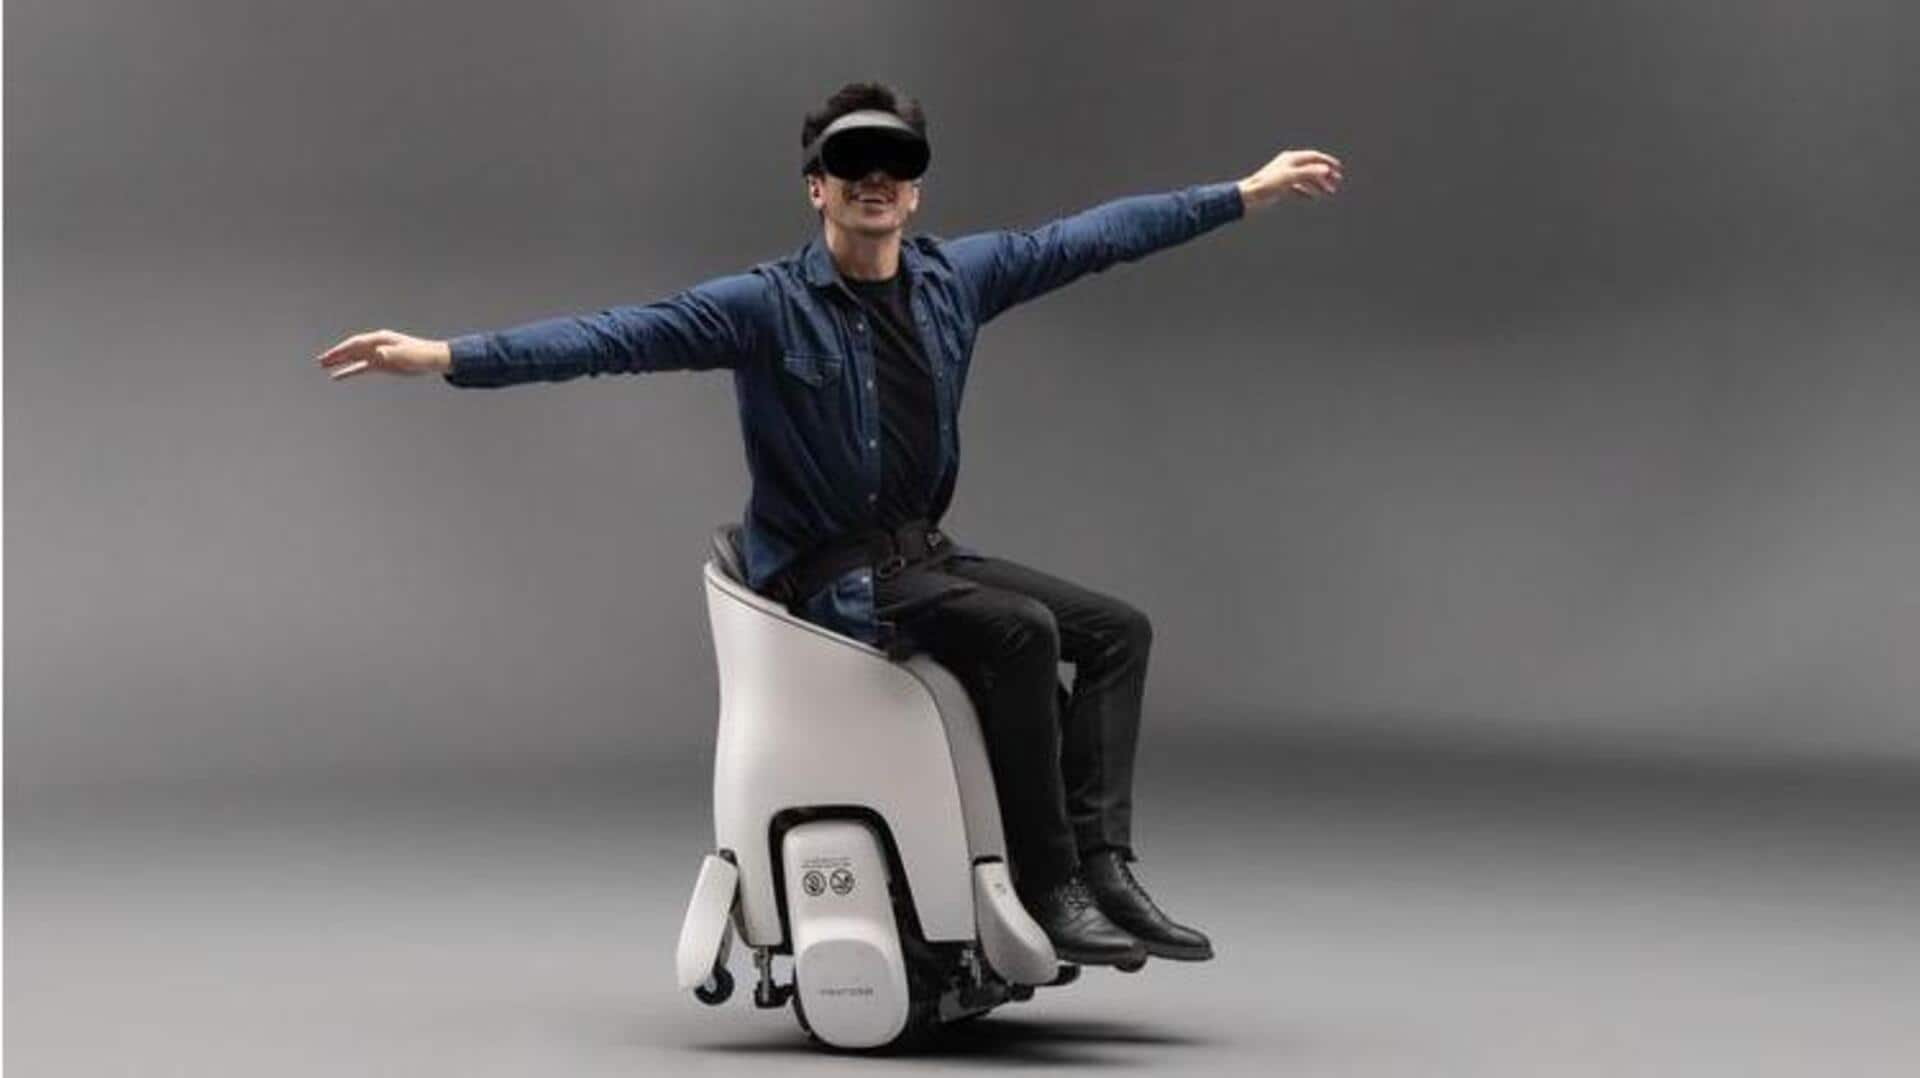 Honda announces 'Extended Reality' experience combining VR and motorized wheelchairs